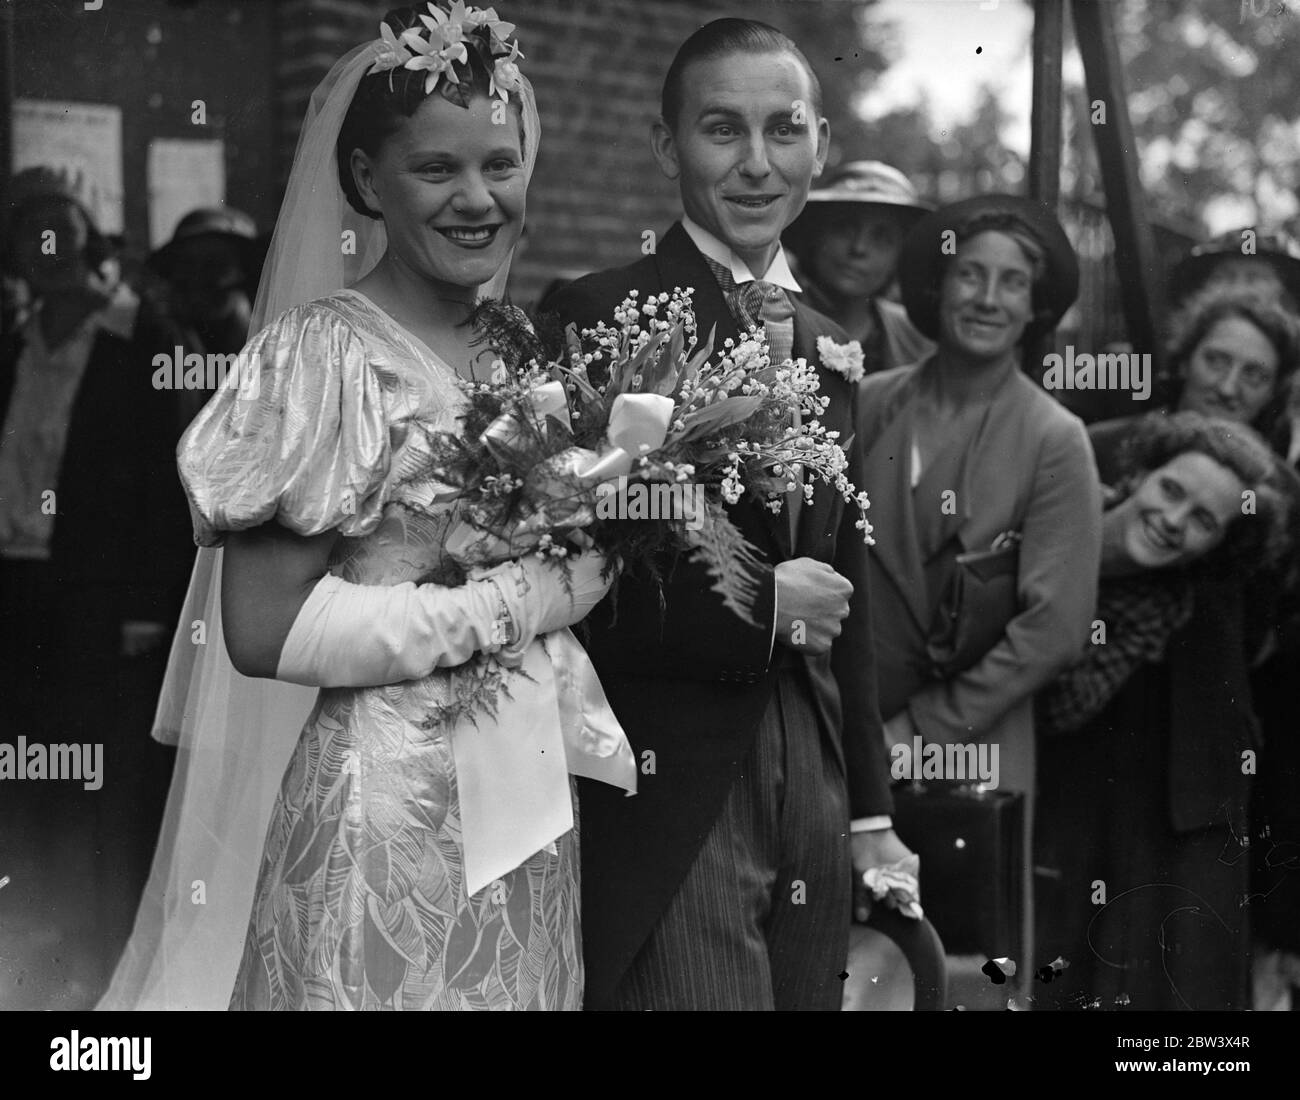 Actress weds actor at London Church . Miss Joan Kemp Welsh , the actress , was married at Chelsea Old Church , London , to Mr Ben H Wright , who appeared in '' The Wind and the Rain '' at the Queen ' s and Savoy Theatres . Miss Kemp Welsh recently appeared in ' Nina ' at the Criterion Theatre . Photo shows , the bride and groom after the ceremony . The bride wore a floral head dress of unusual design and puff sleeves . 22 August 1936 Original caption from negative Stock Photo